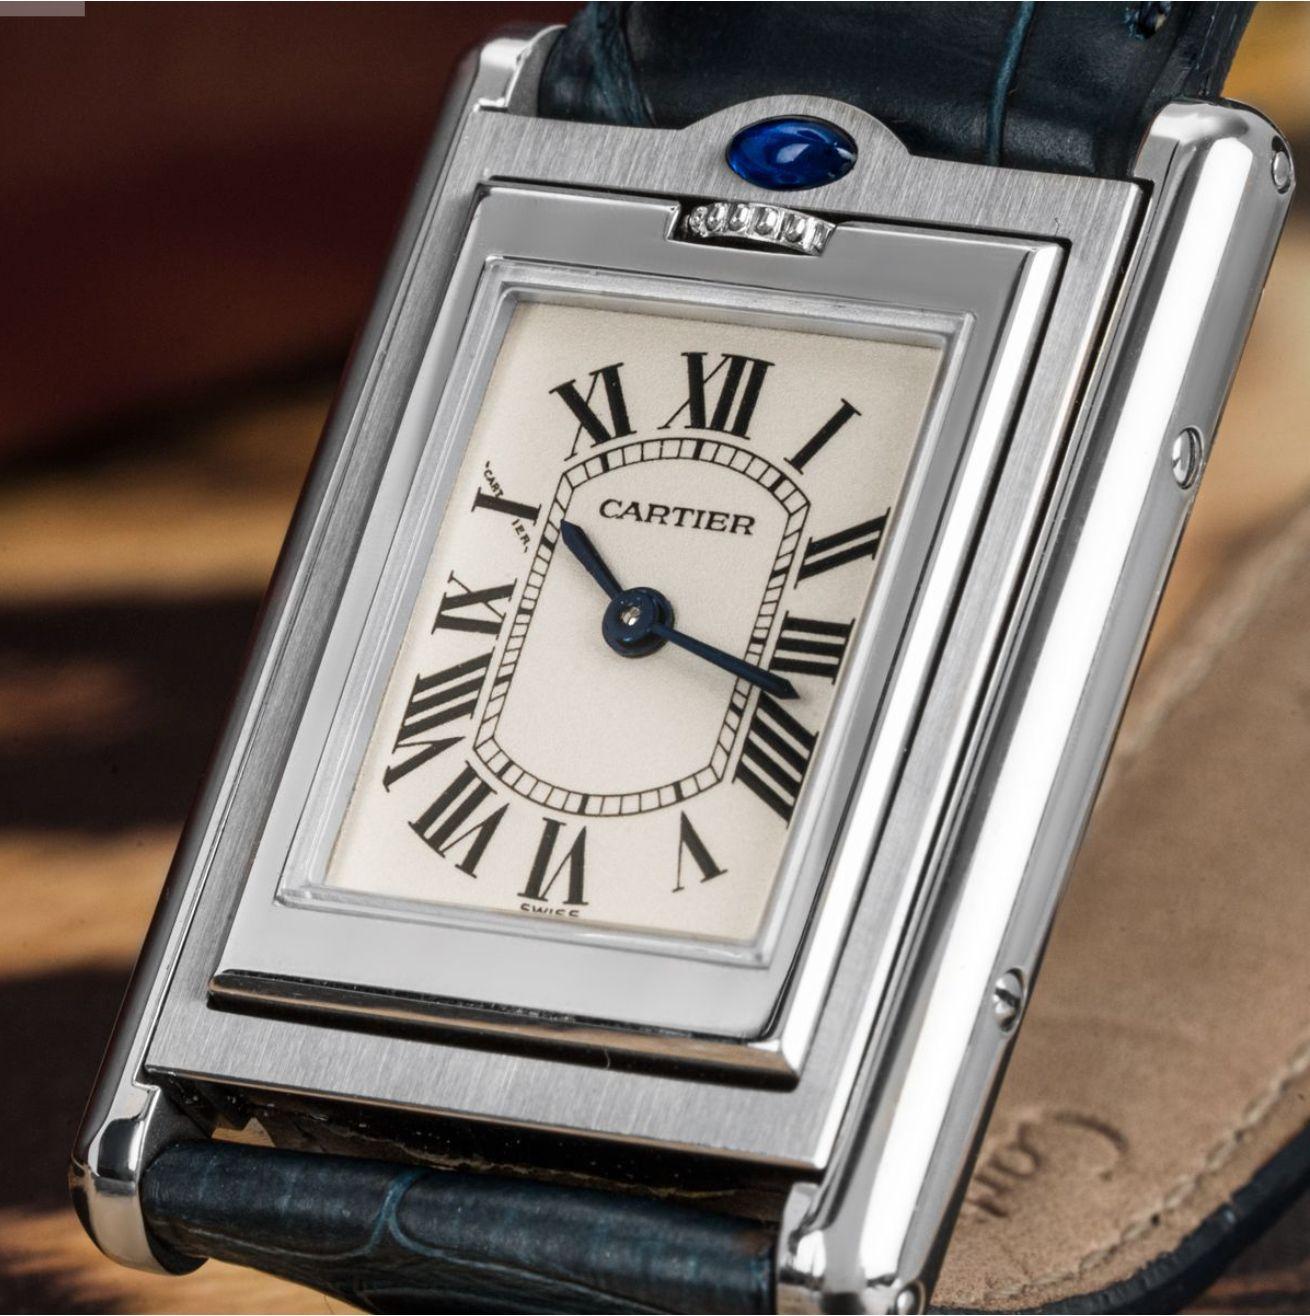 A Stainless Steel Tank Basculante wristwatch. Featuring a silver reversible dial with roman numerals with blued steeled sword shaped hands, a secret Cartier signature at X and a stainless steel bezel.

Fitted with a scratch-resistant sapphire